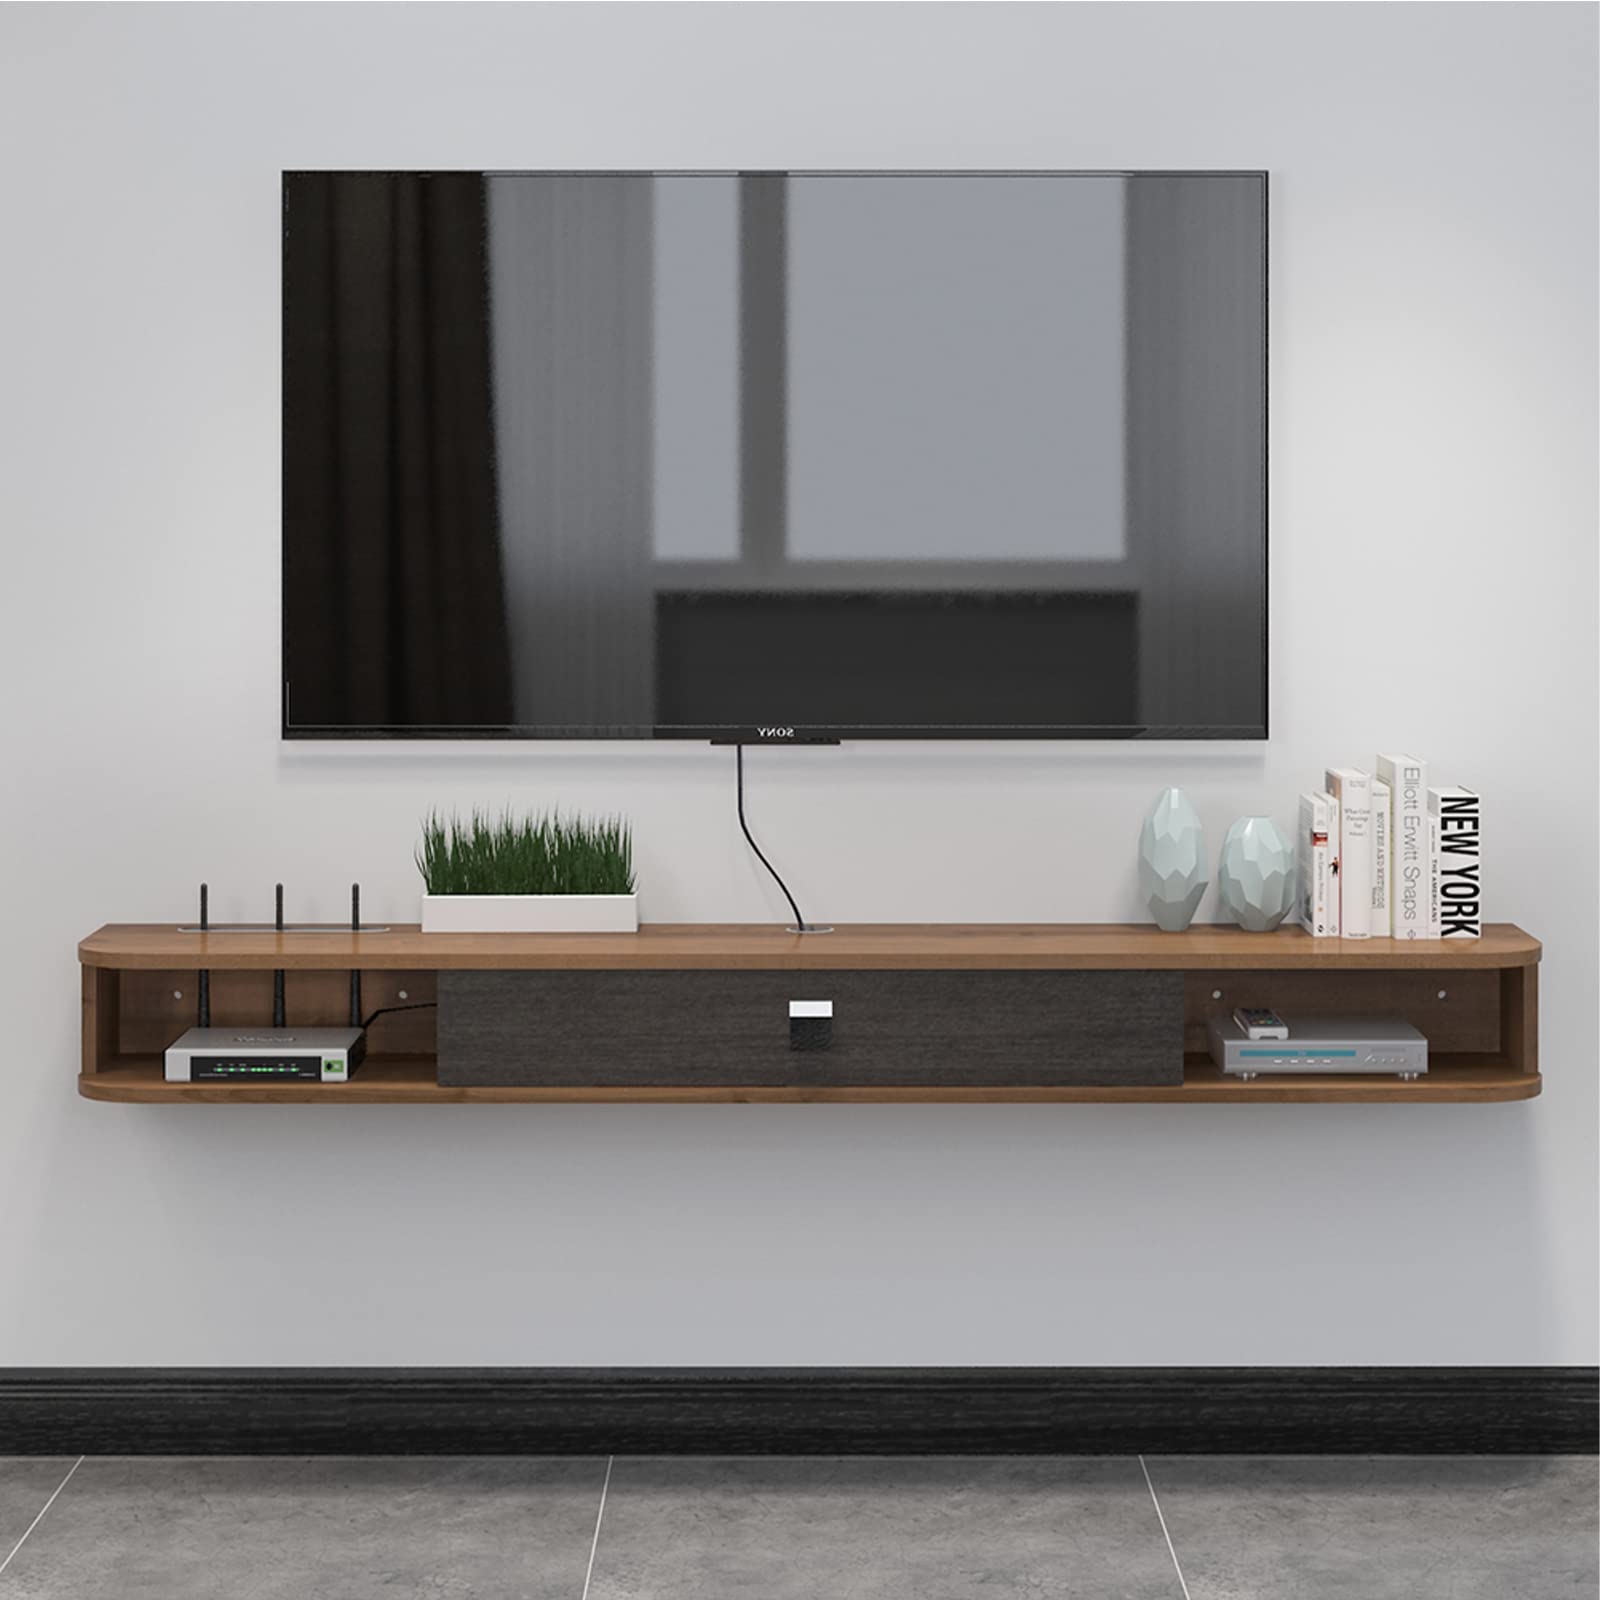 Customize Plywood Slim Floating TV Stand with Hidden Storage Media Console